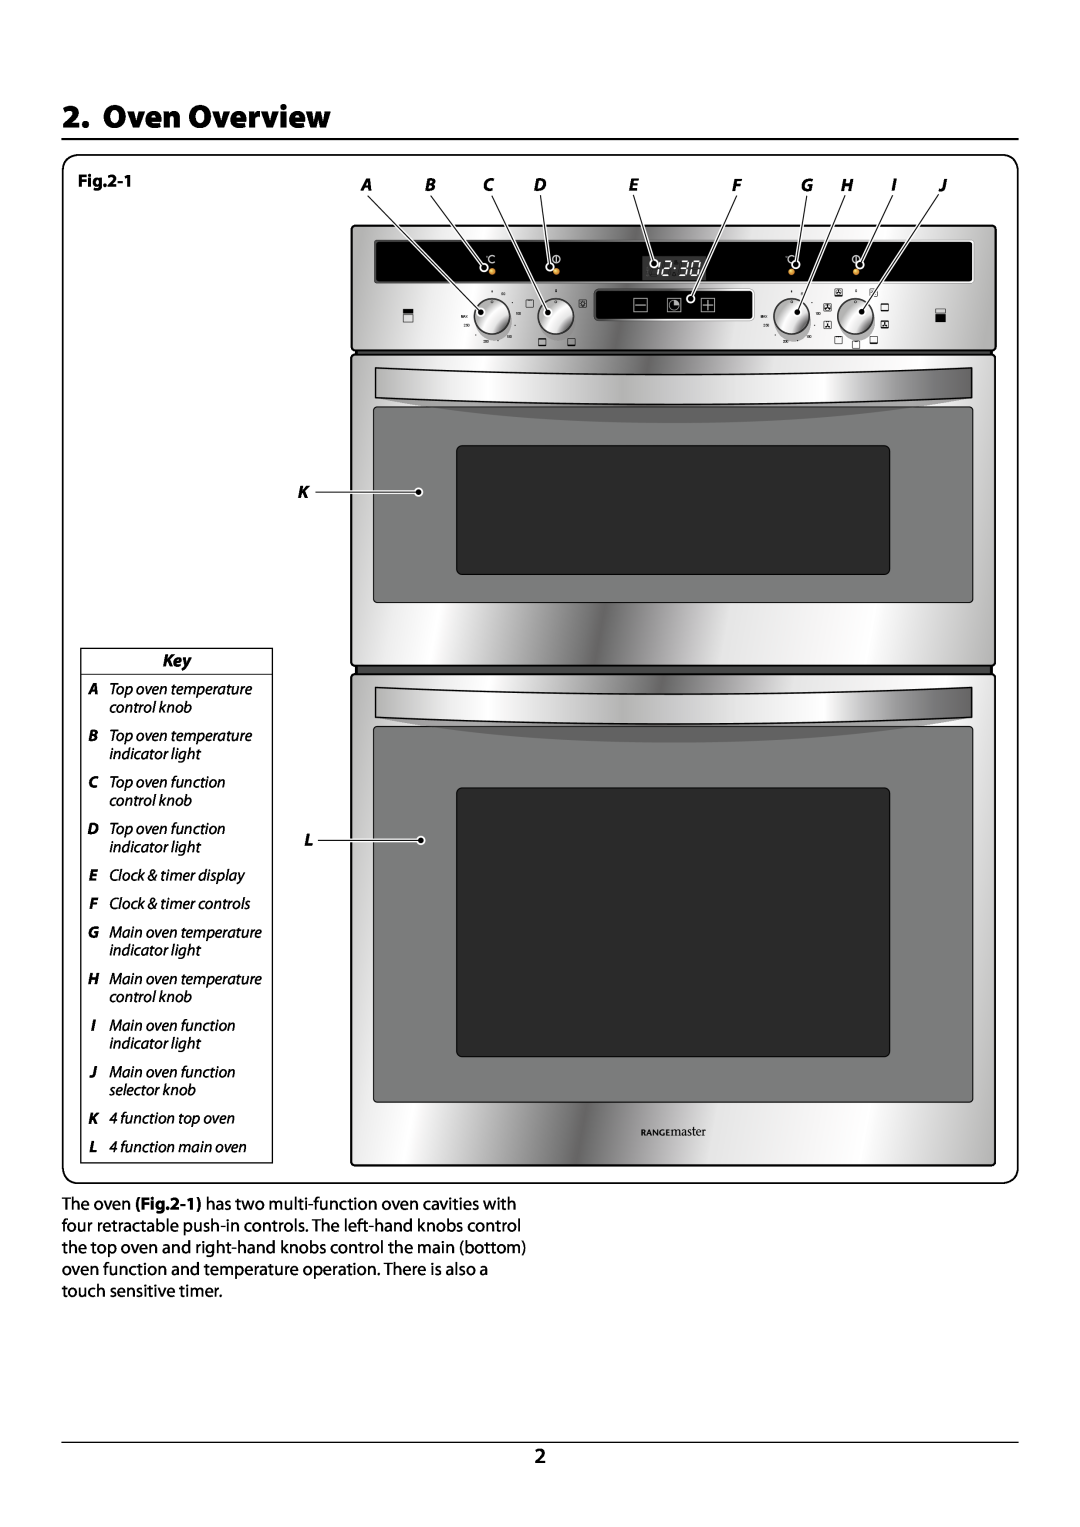 Rangemaster R9049 manual Oven Overview 